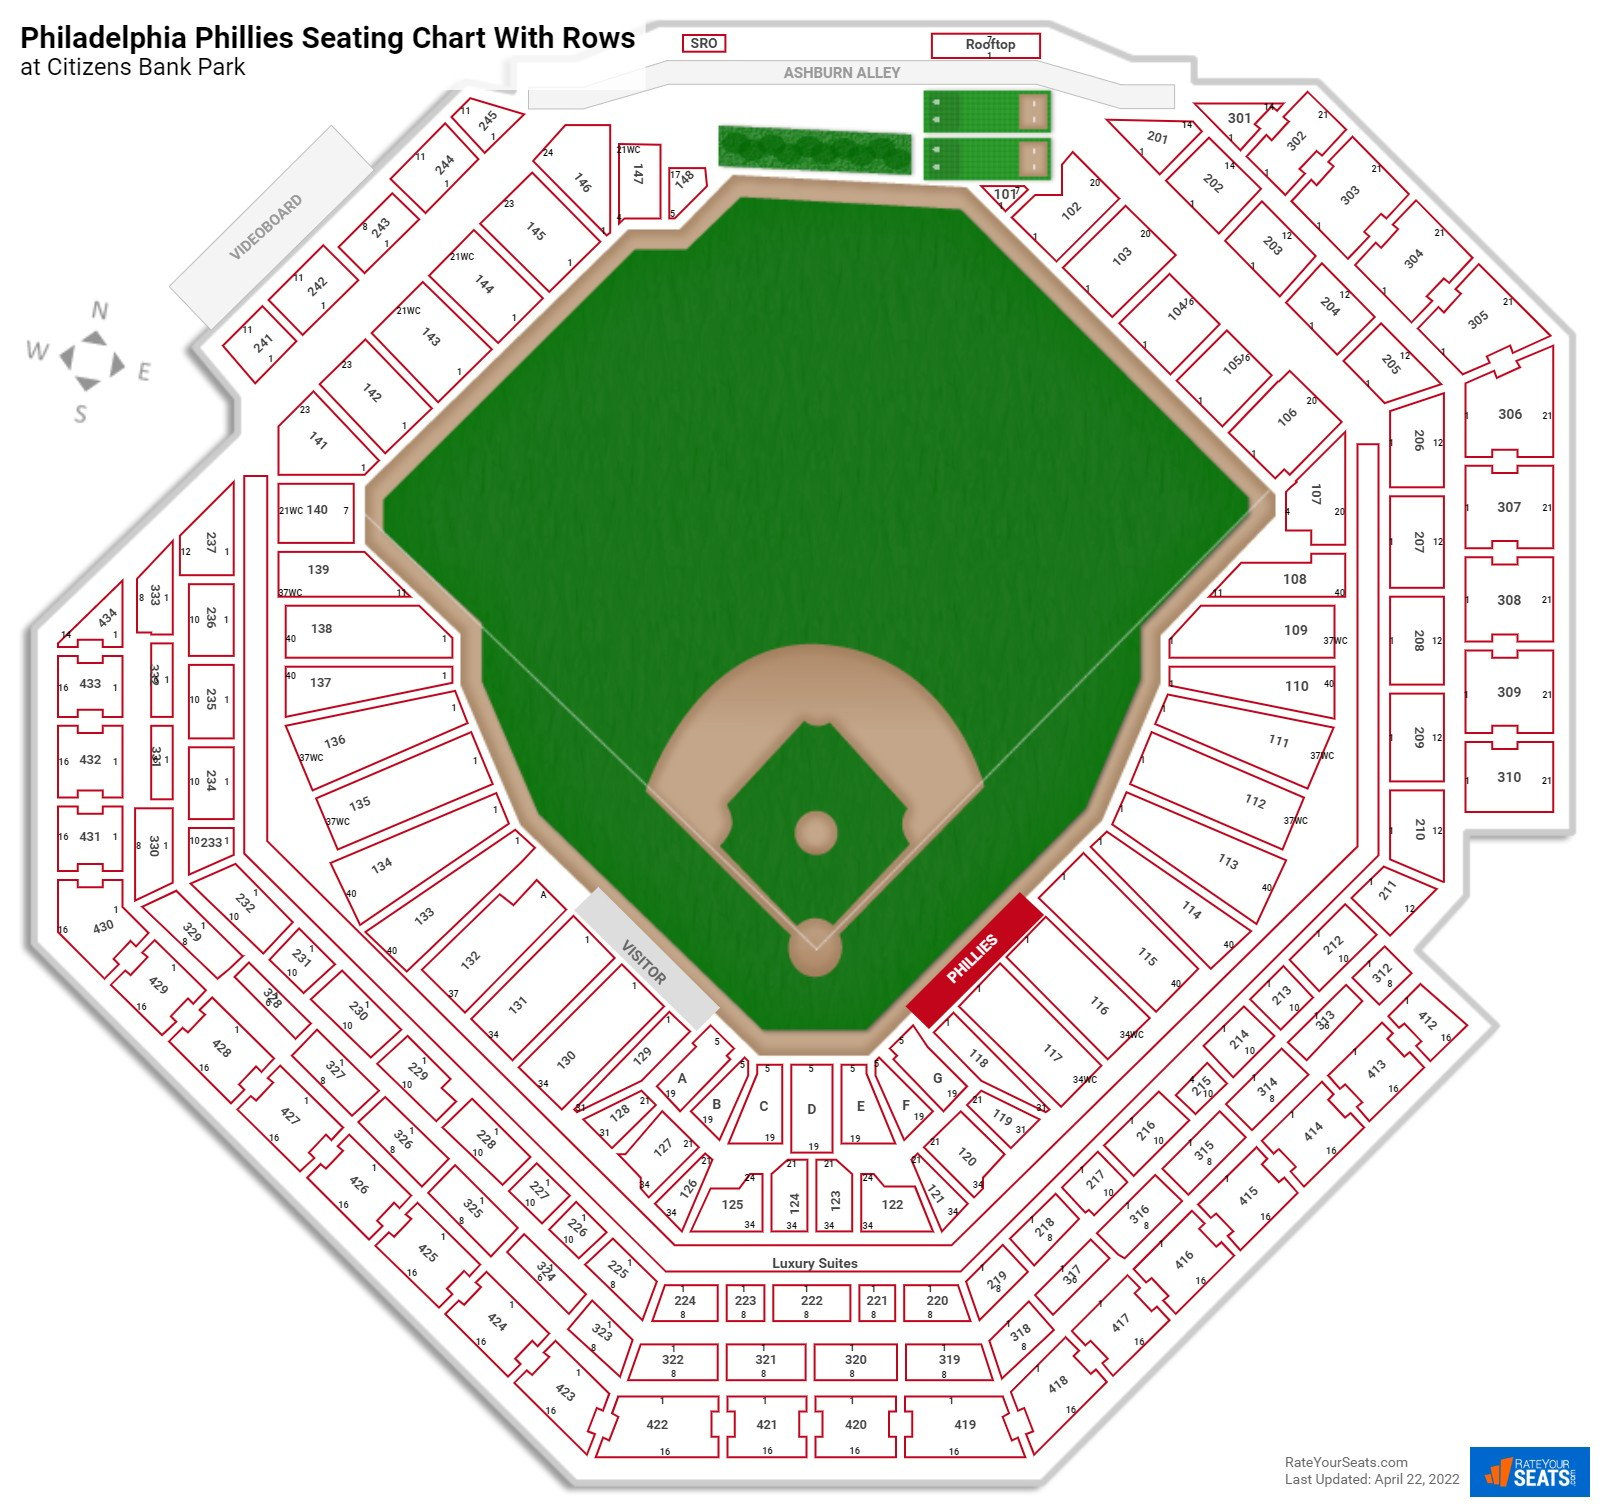 Citizens Bank Park Seating Chart & Game Information